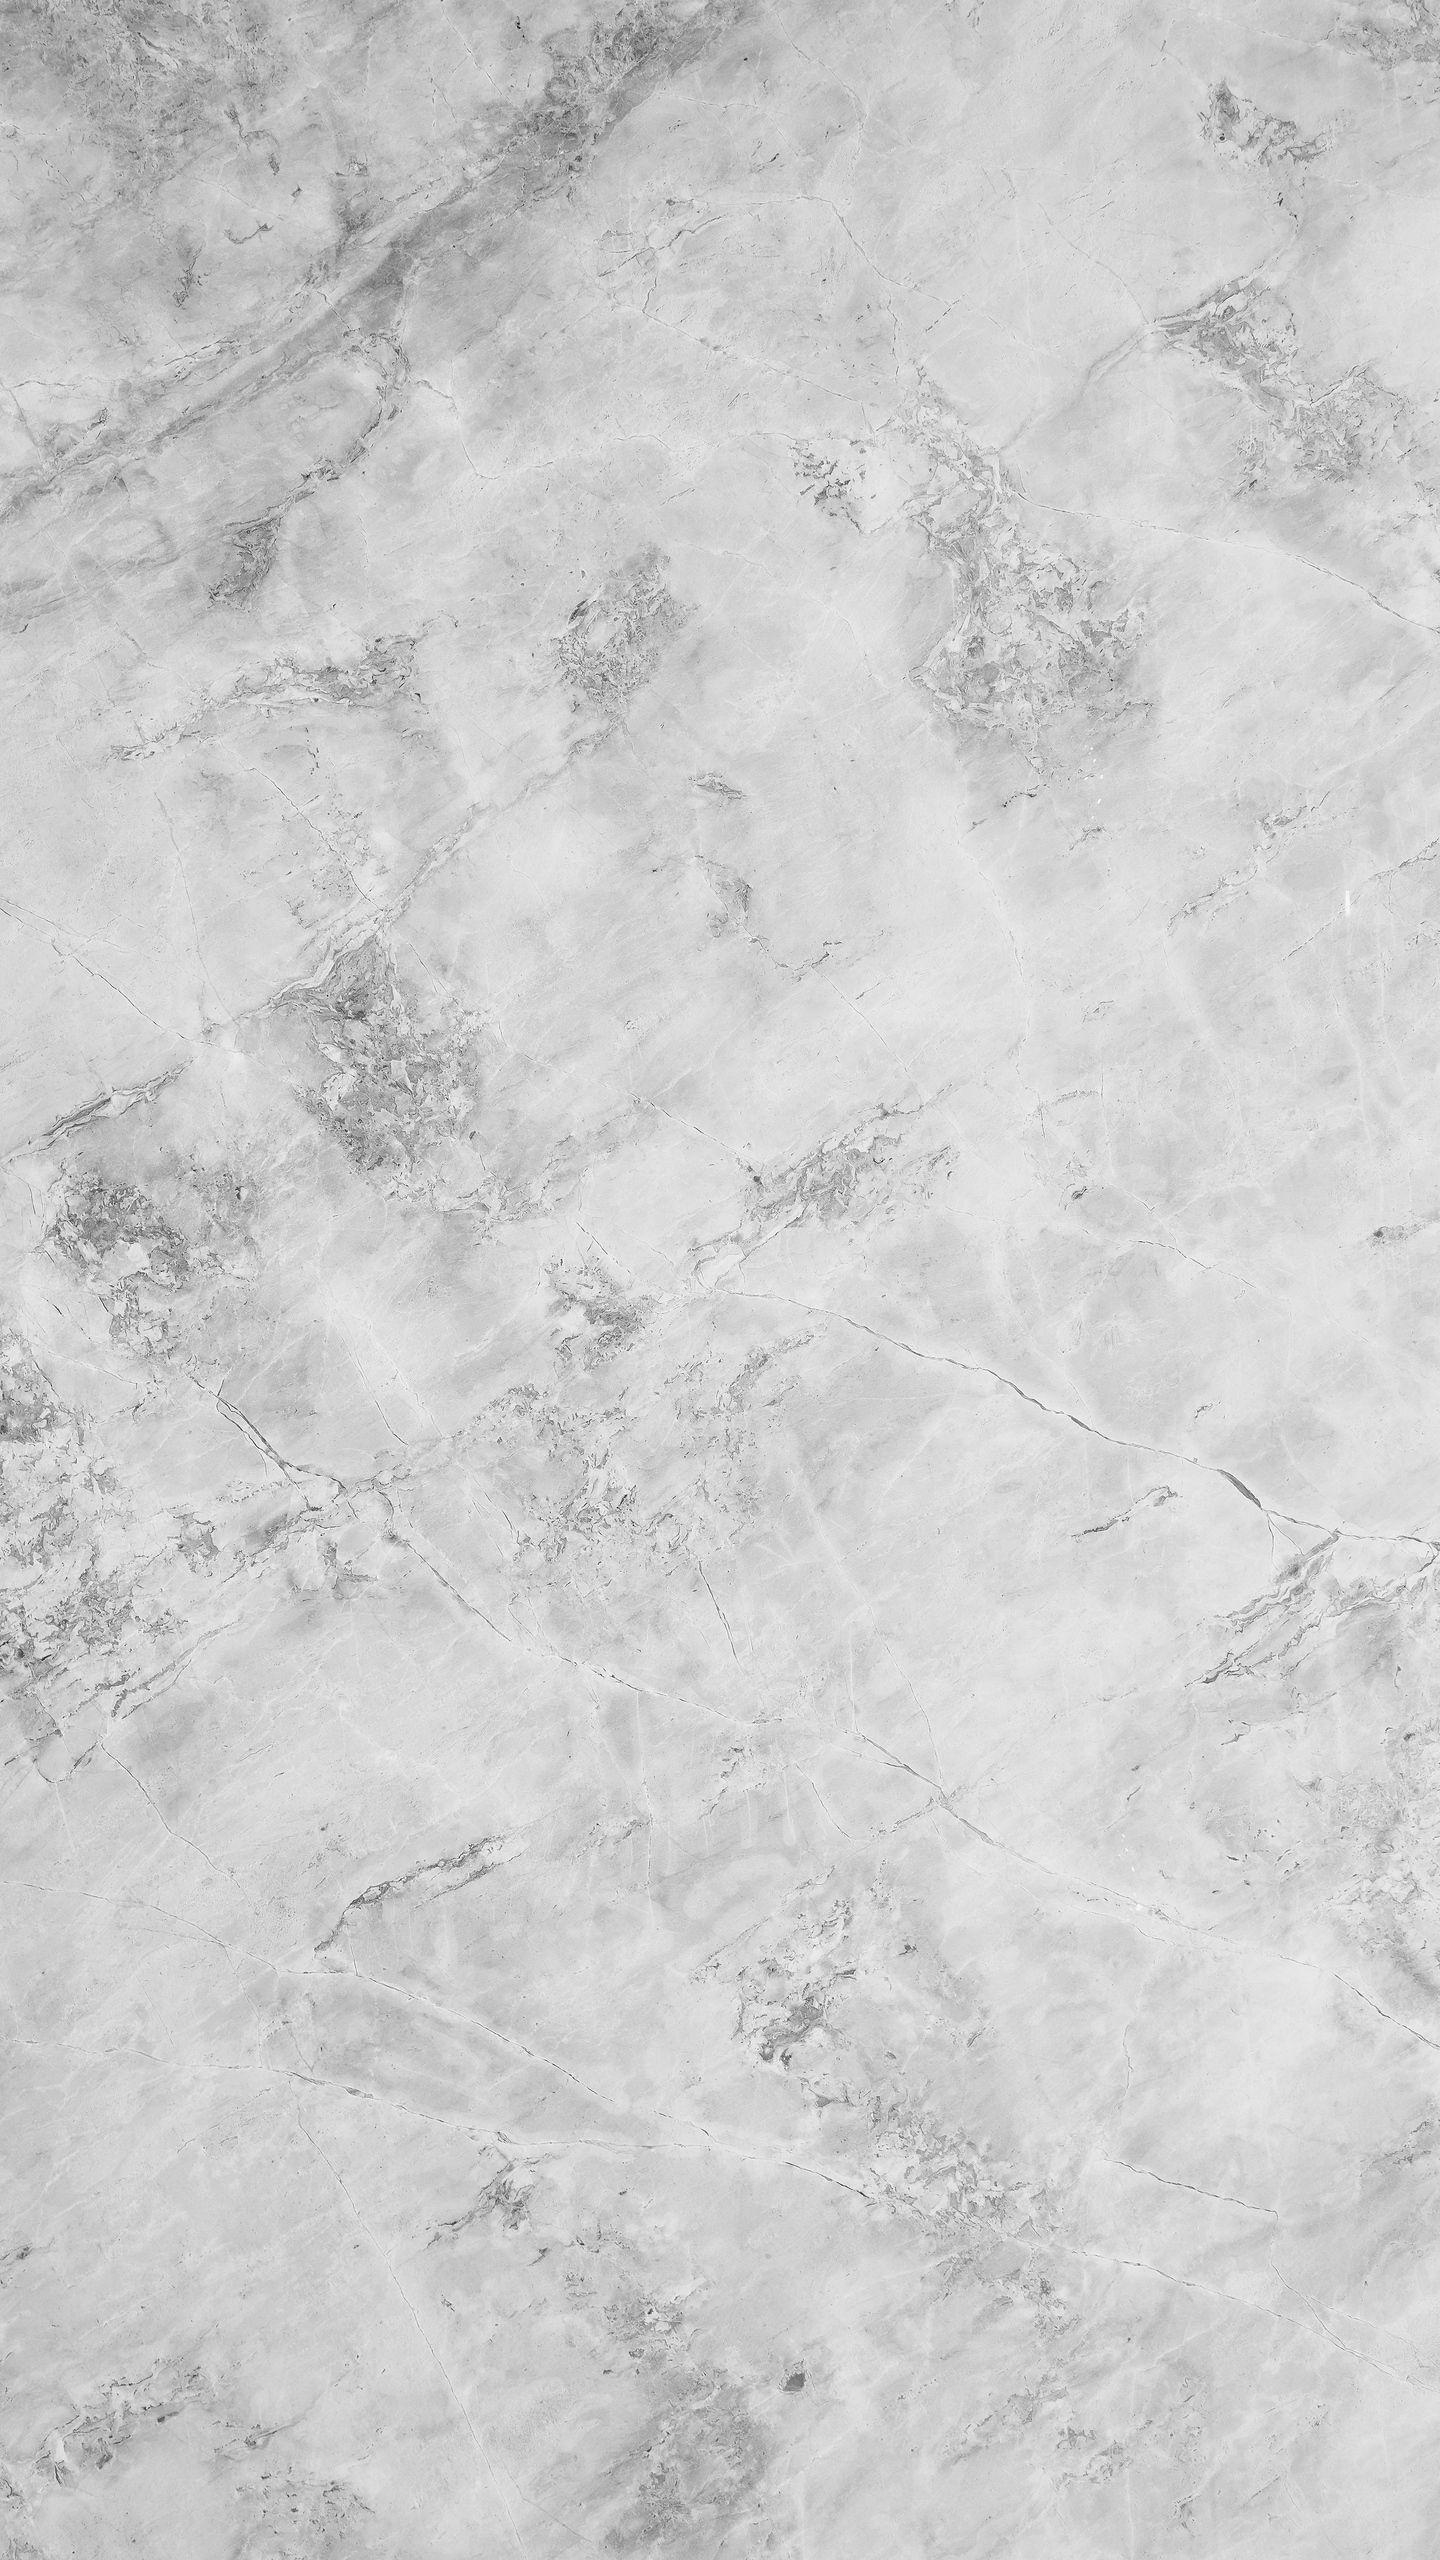 Marble Texture Wallpapers - Top Free Marble Texture Backgrounds